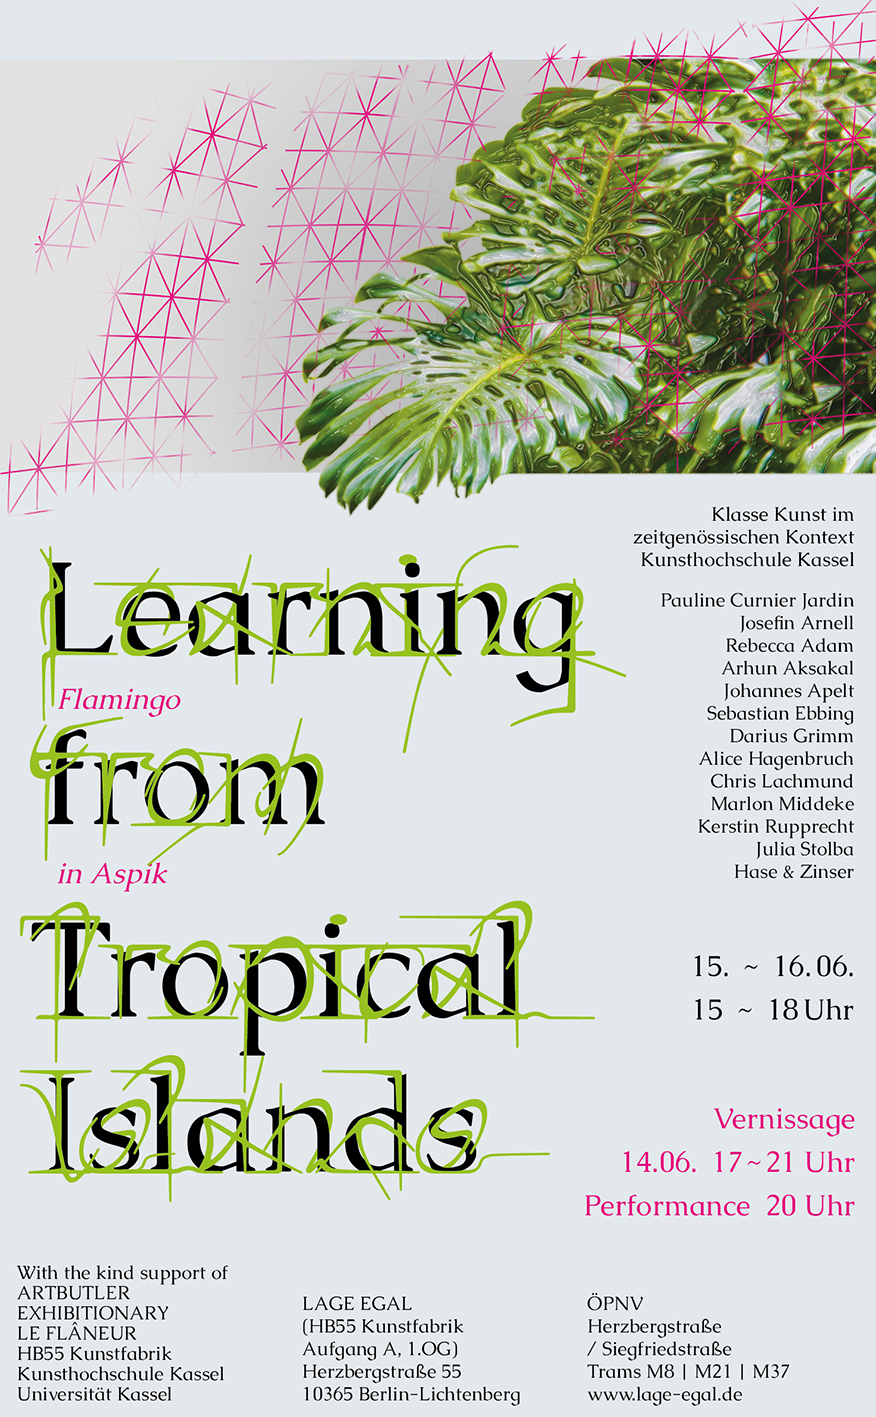 Learning from Tropical Islands - Flamingo in Aspik